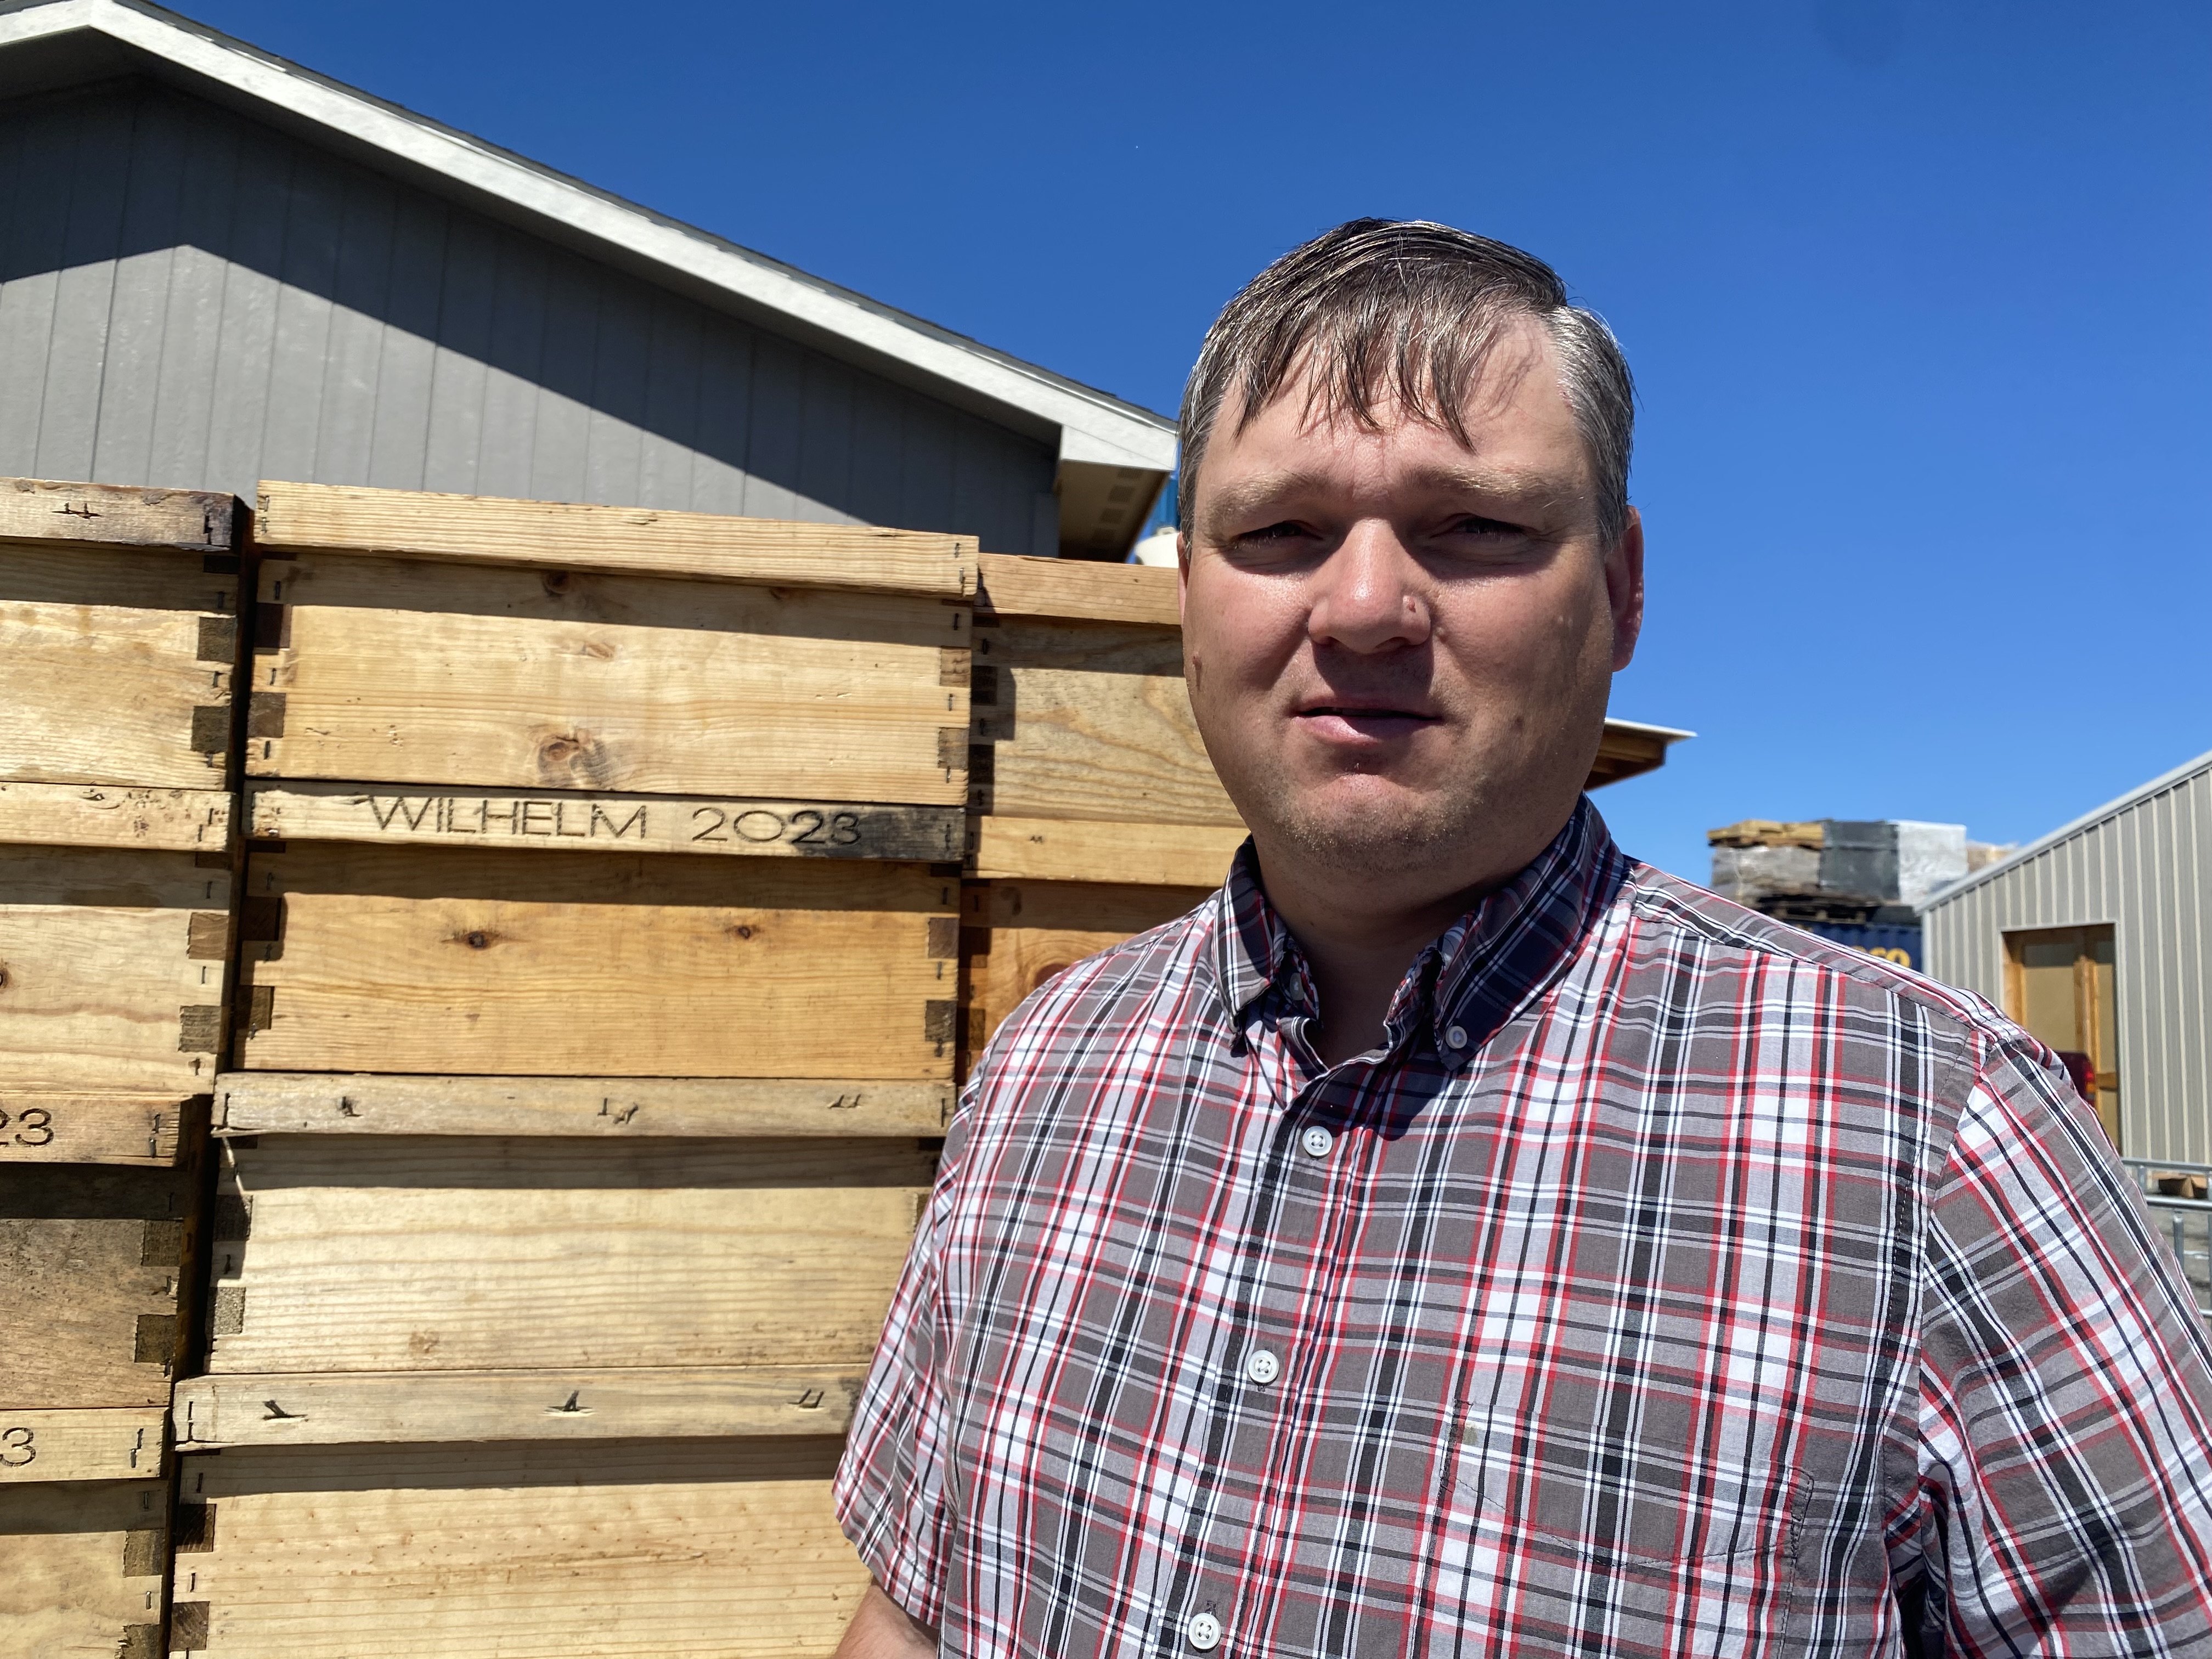 Bud Wilhelm stands in front of some new bee boxes on Monday constructed on his farm in Royal City, Washington.